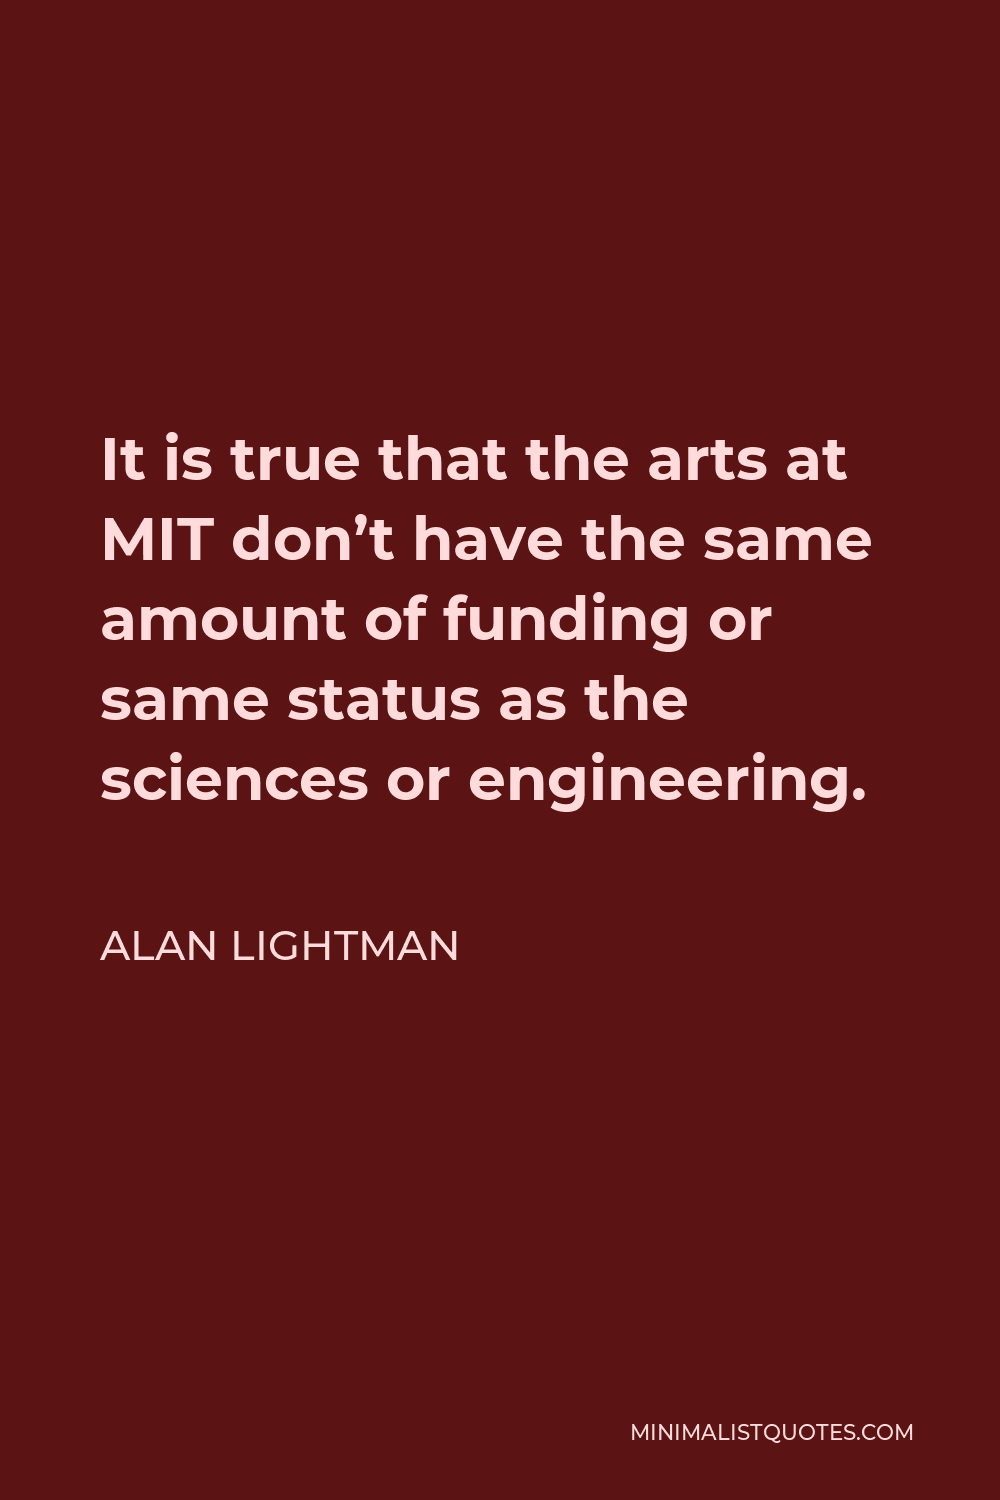 Alan Lightman Quote - It is true that the arts at MIT don’t have the same amount of funding or same status as the sciences or engineering.